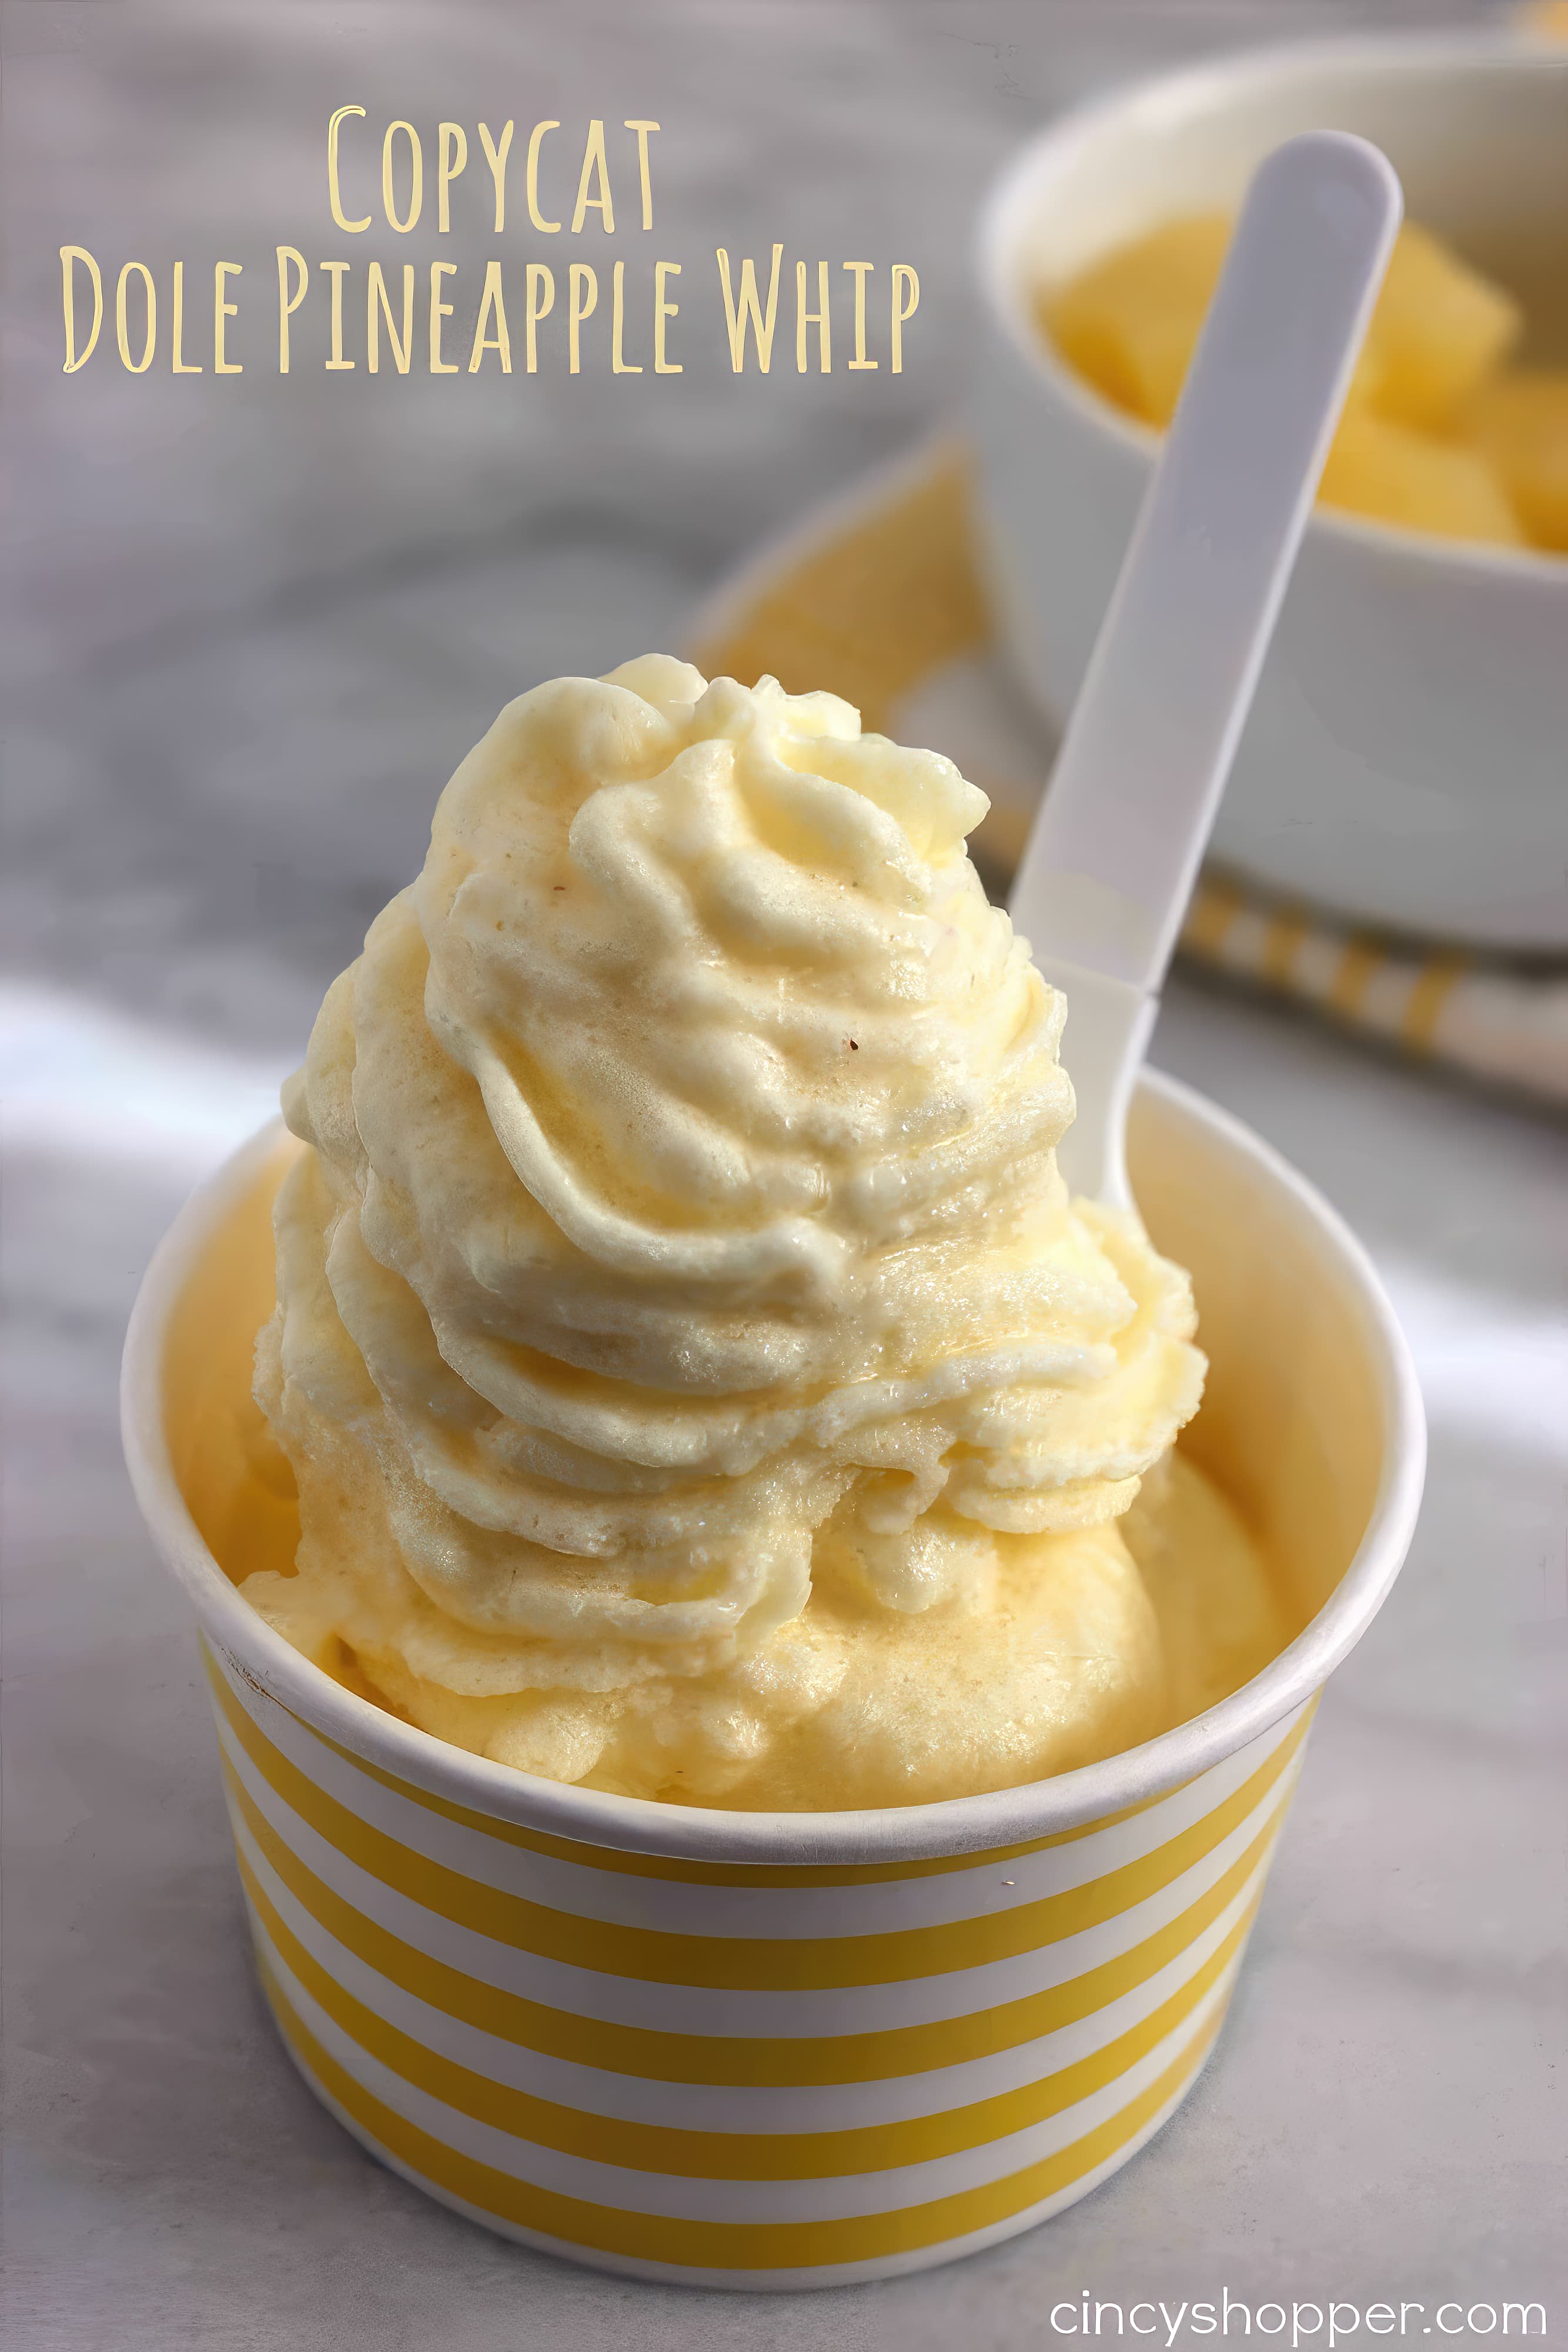 Image of copycat dole pineapple whip